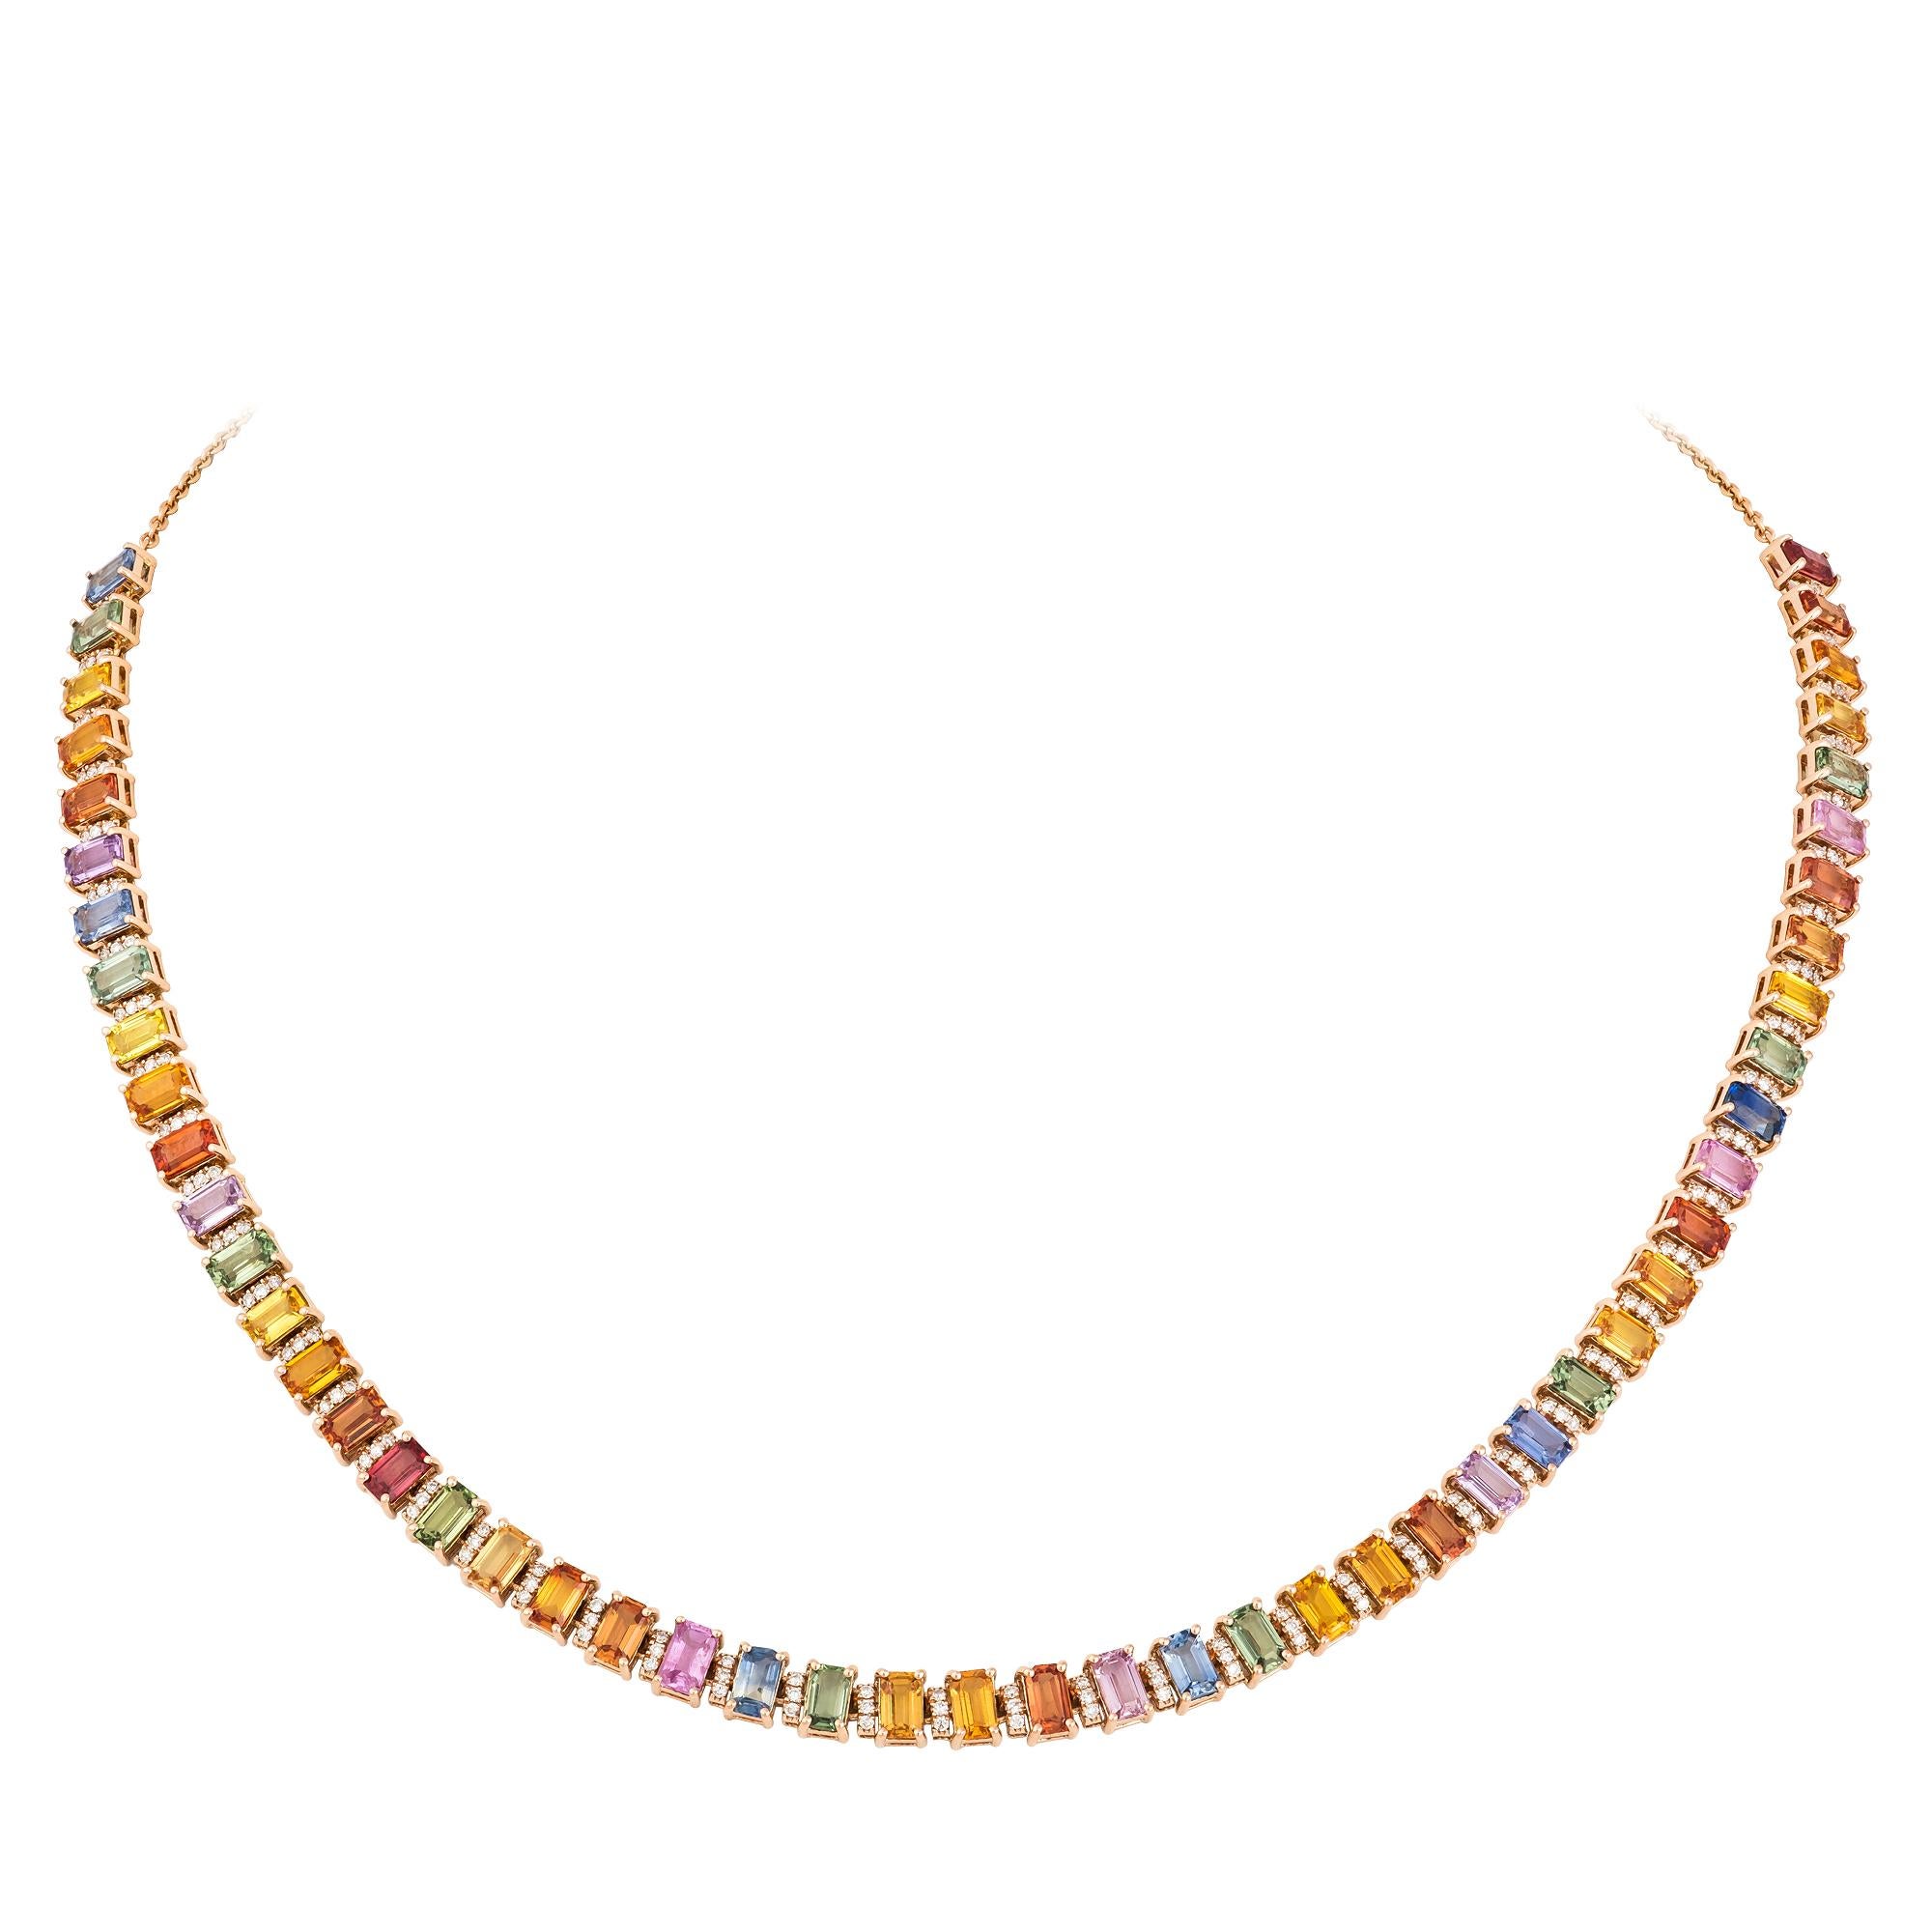 NECKLACE 18K Rose Gold 
Diamond 0.69 Cts/150 Pcs 
Multi Sapphire 18.77 Cts/51 Pcs

With a heritage of ancient fine Swiss jewelry traditions, NATKINA is a Geneva based jewellery brand, which creates modern jewellery masterpieces suitable for every